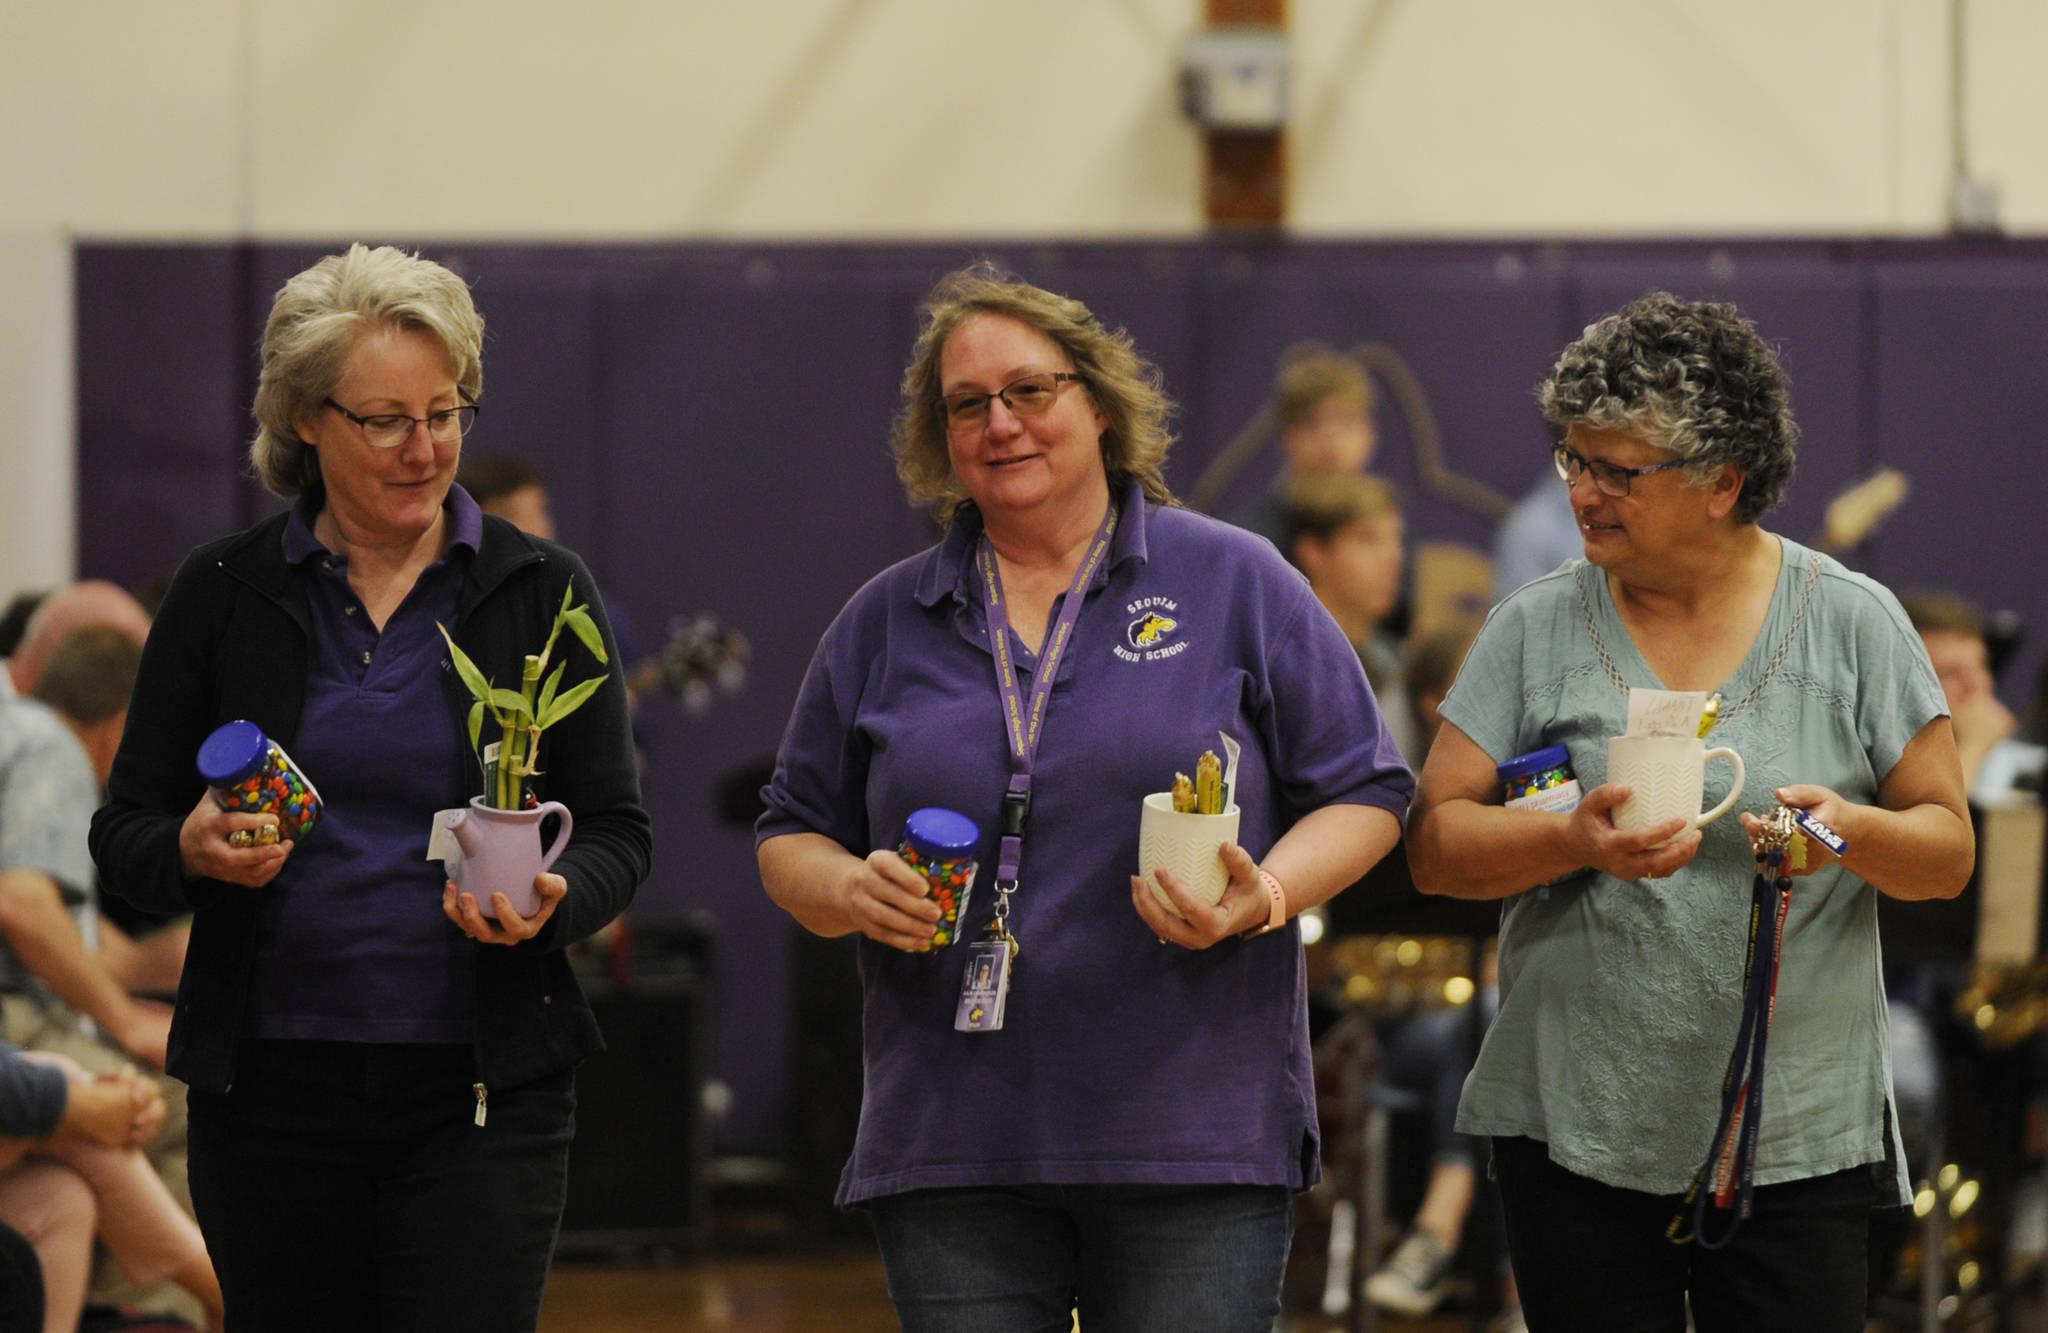 Sequim High office staff (from left) Erin Ulm, Julie Lancheros and Ann Tjemsland receive treats from graduating seniors at a Senior Recognition Assembly on May 31. Sequim Gazette photo by Michael Dashiell